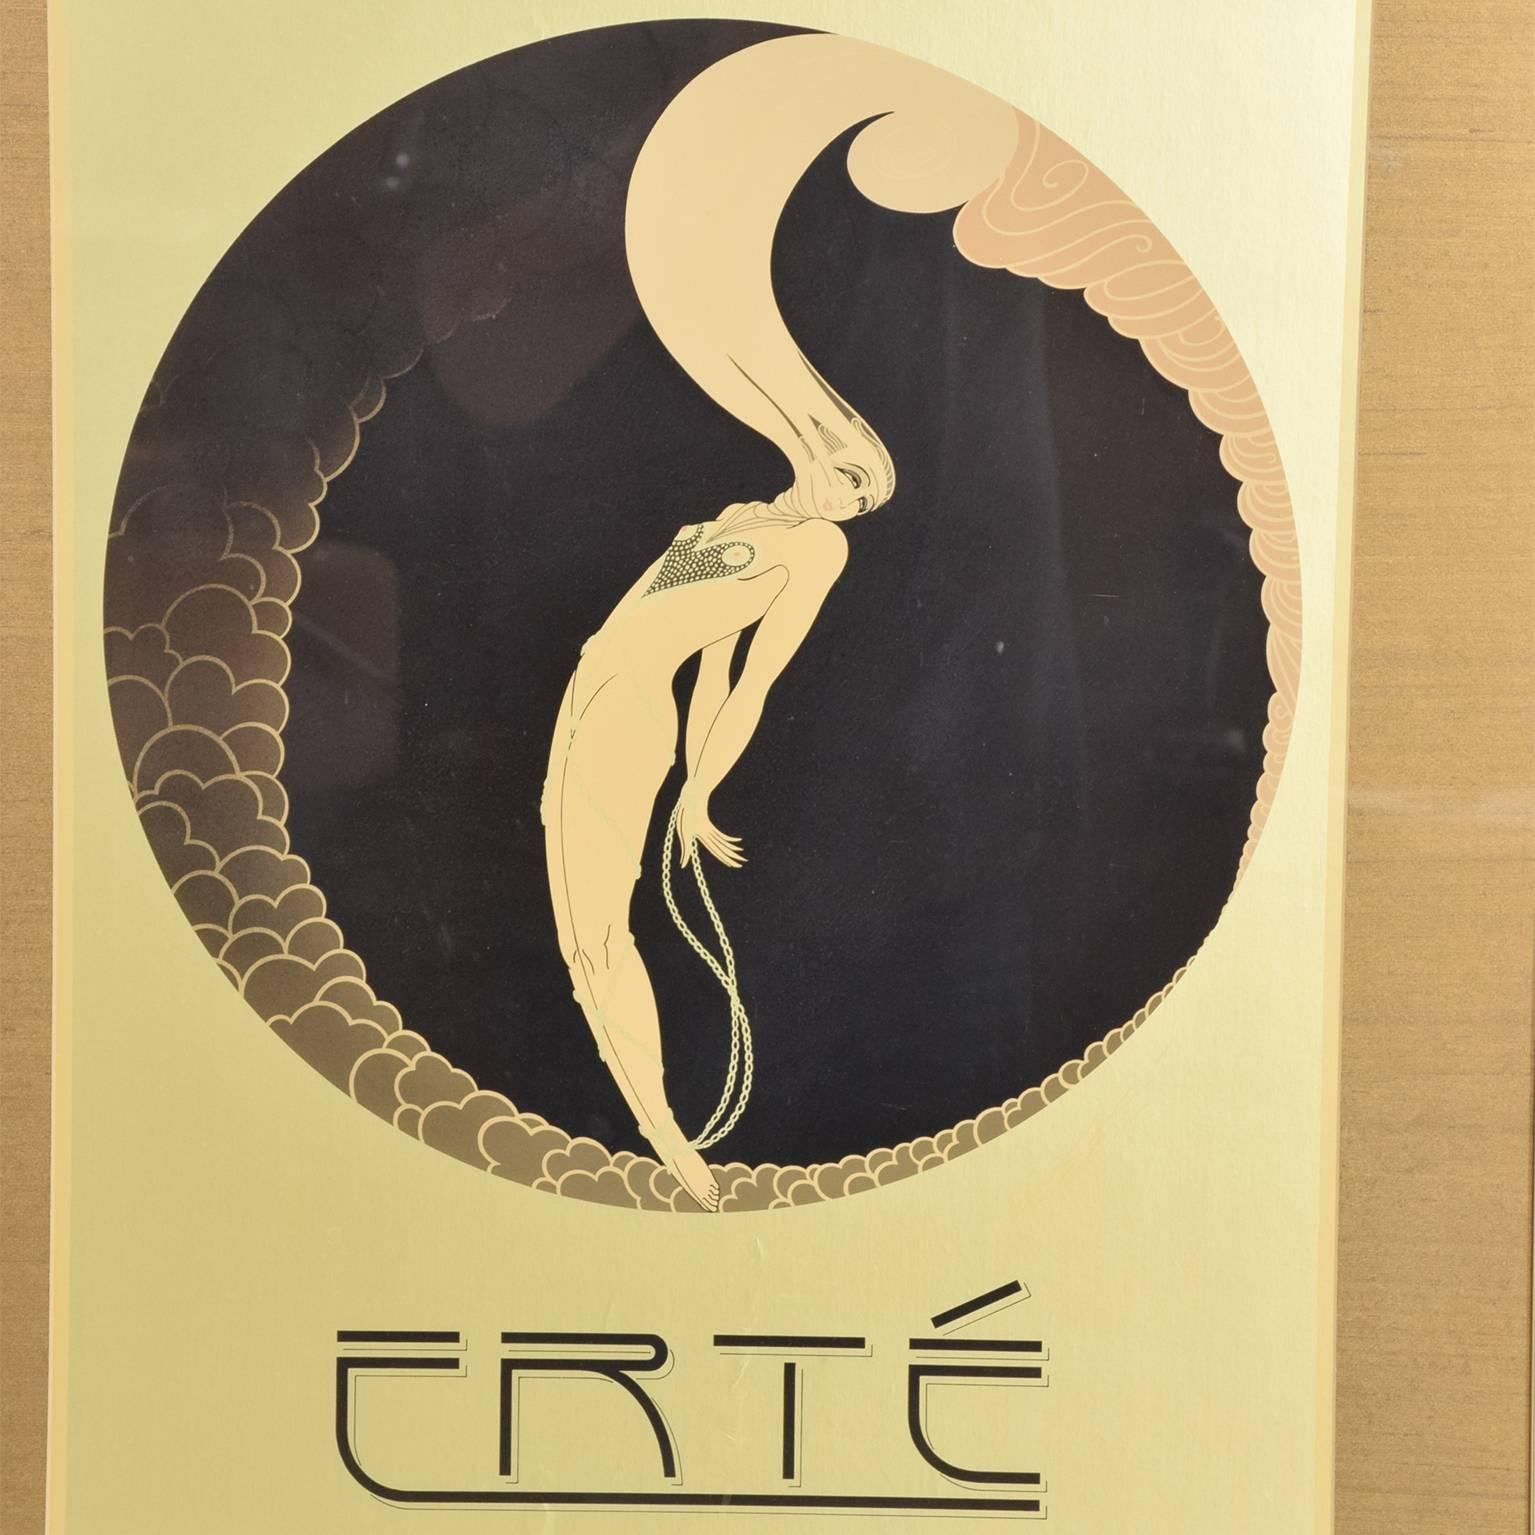 For your consideration a vintage poster depicting Erte's screen-print 